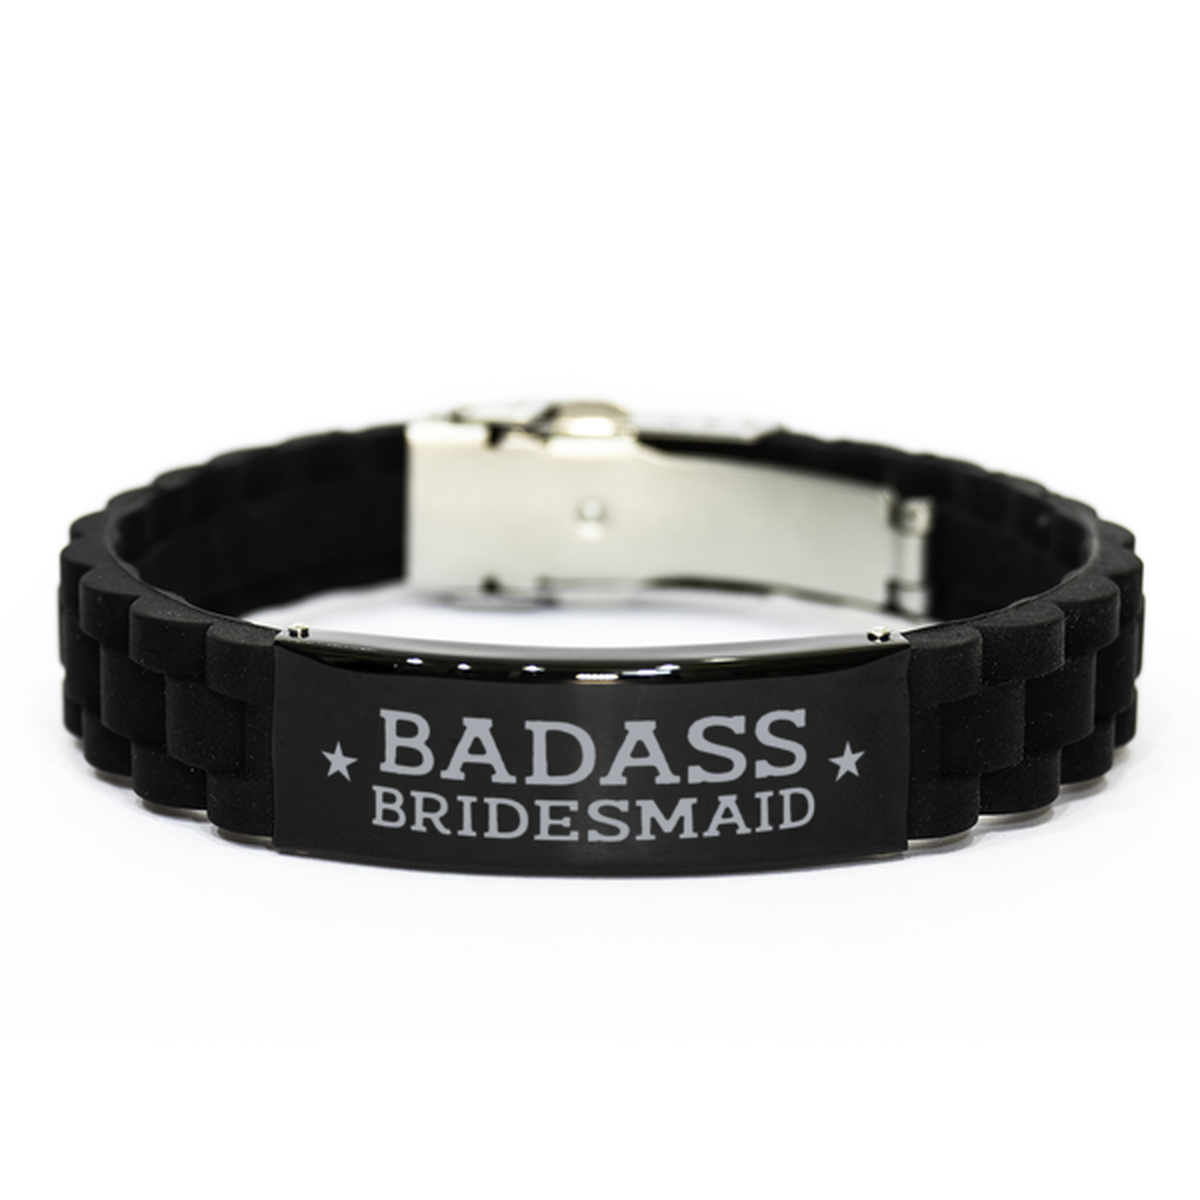 Bridemaid Black Bracelet, Badass Bridemaid, Funny Family Gifts For Bridemaid From Bride